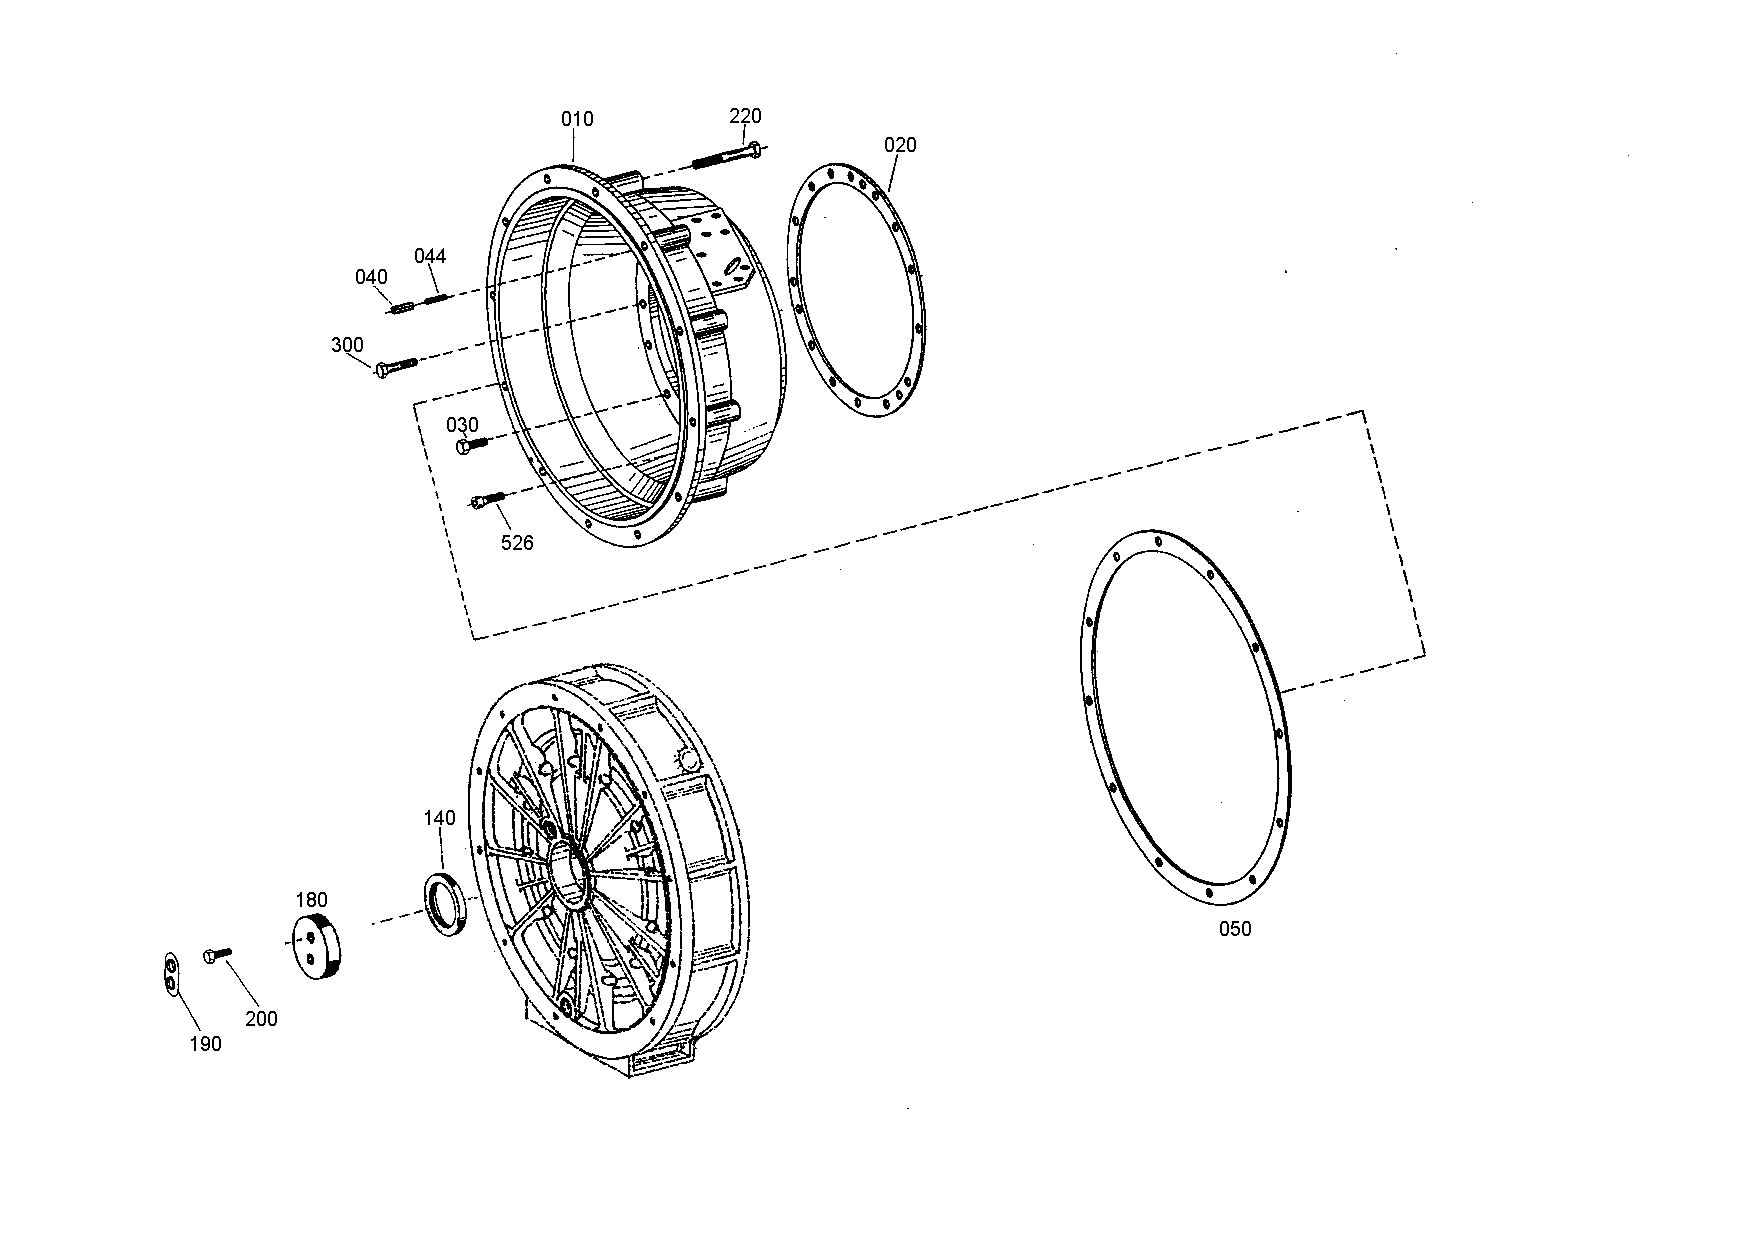 drawing for MOXY TRUCKS AS 052524 - SHAFT SEAL (figure 3)